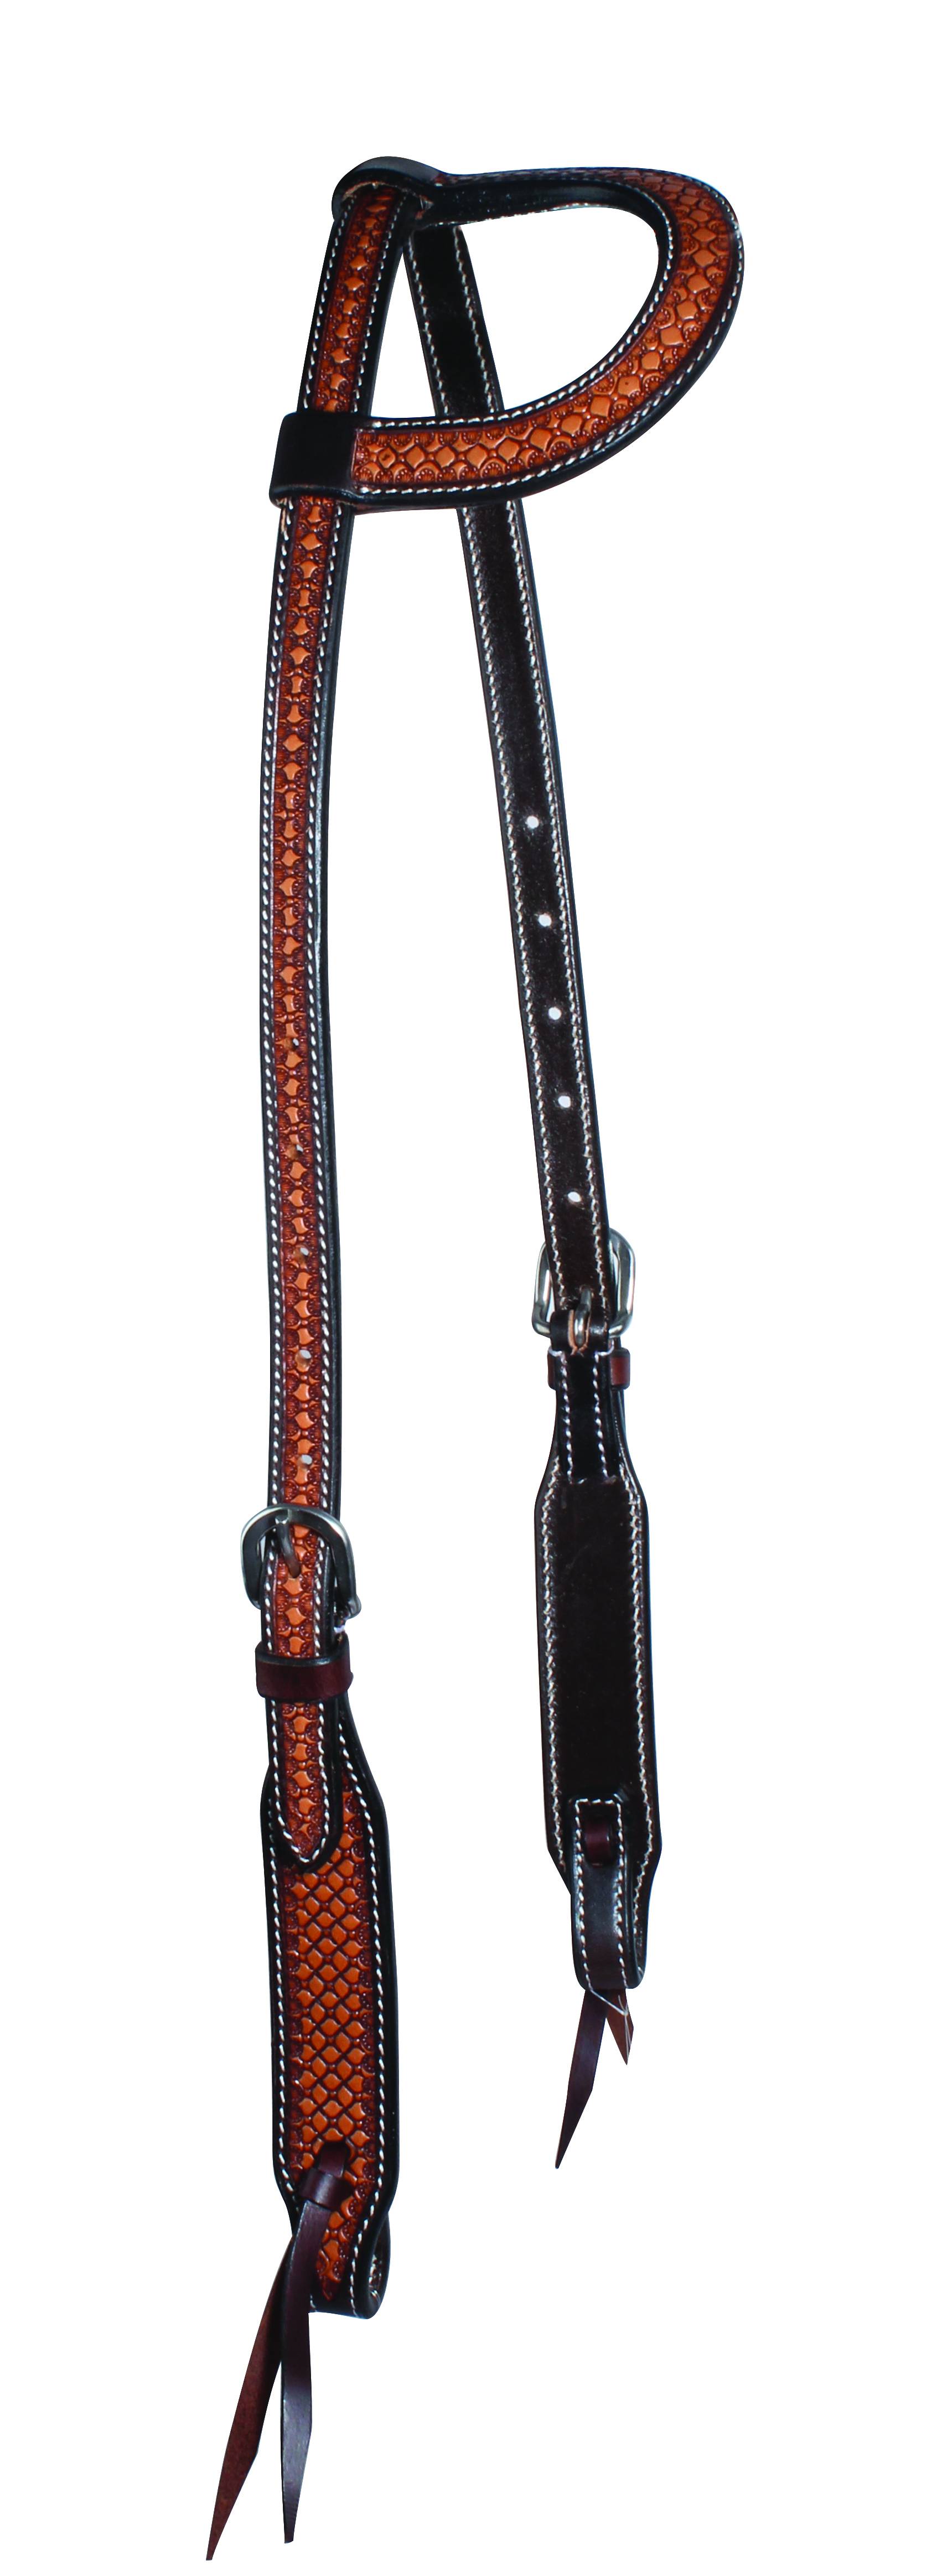 3P1022 Professionals Choice Reptile One Ear Headstall sku 3P1022